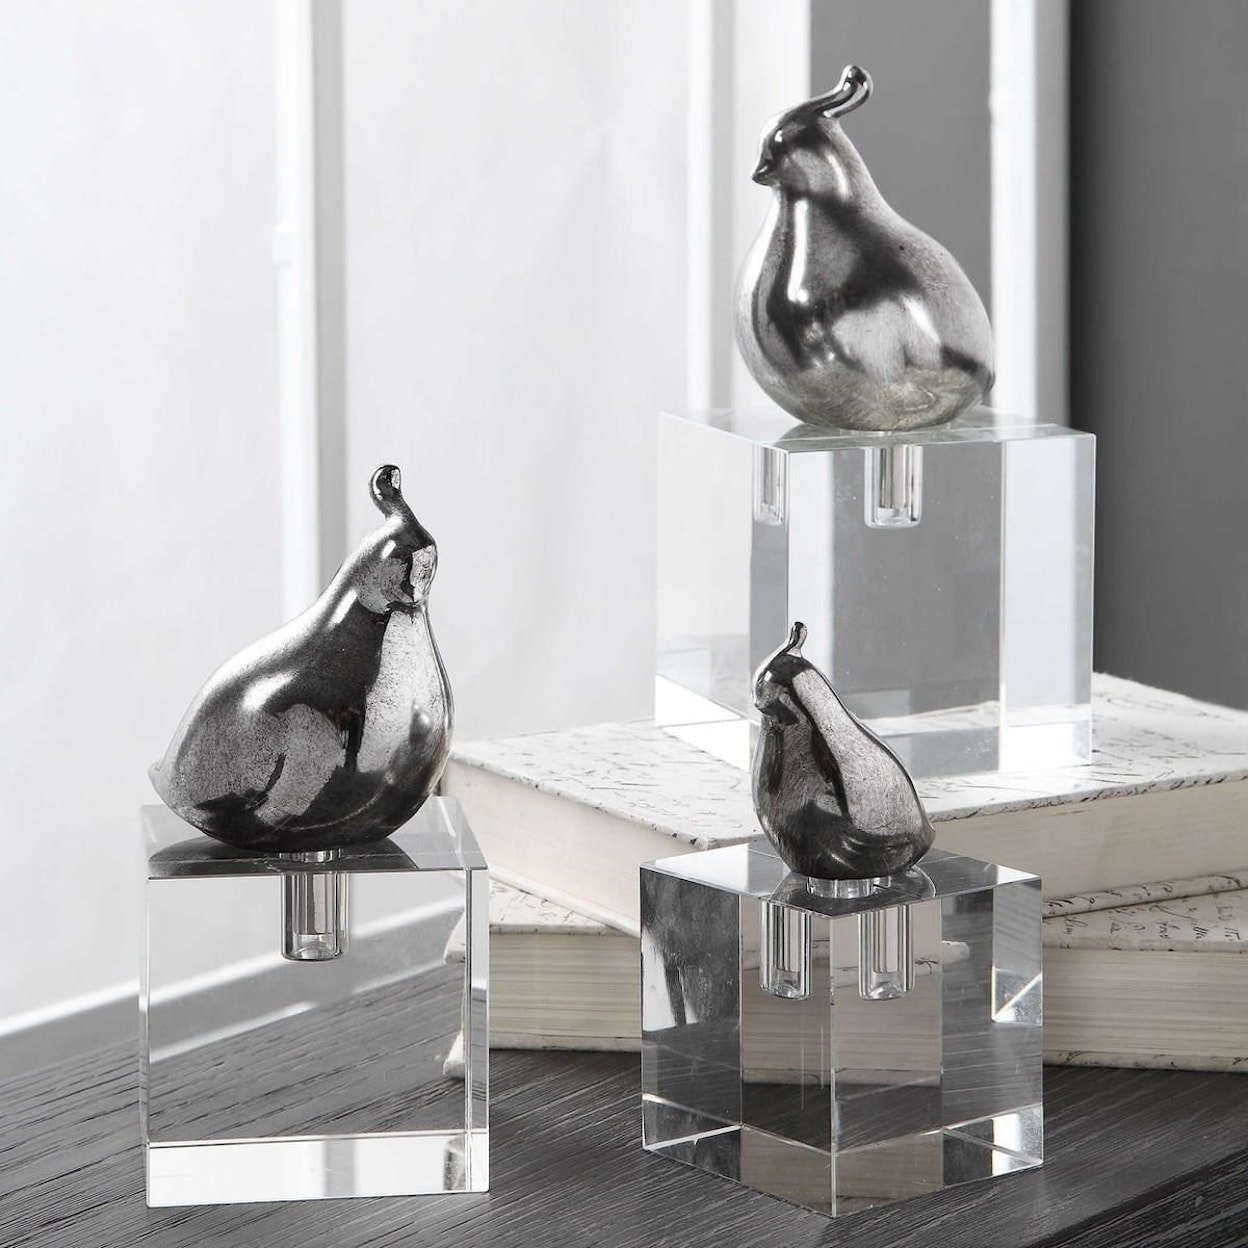 Uttermost Accessories - Statues and Figurines Aira Bird Figurines, Set/3